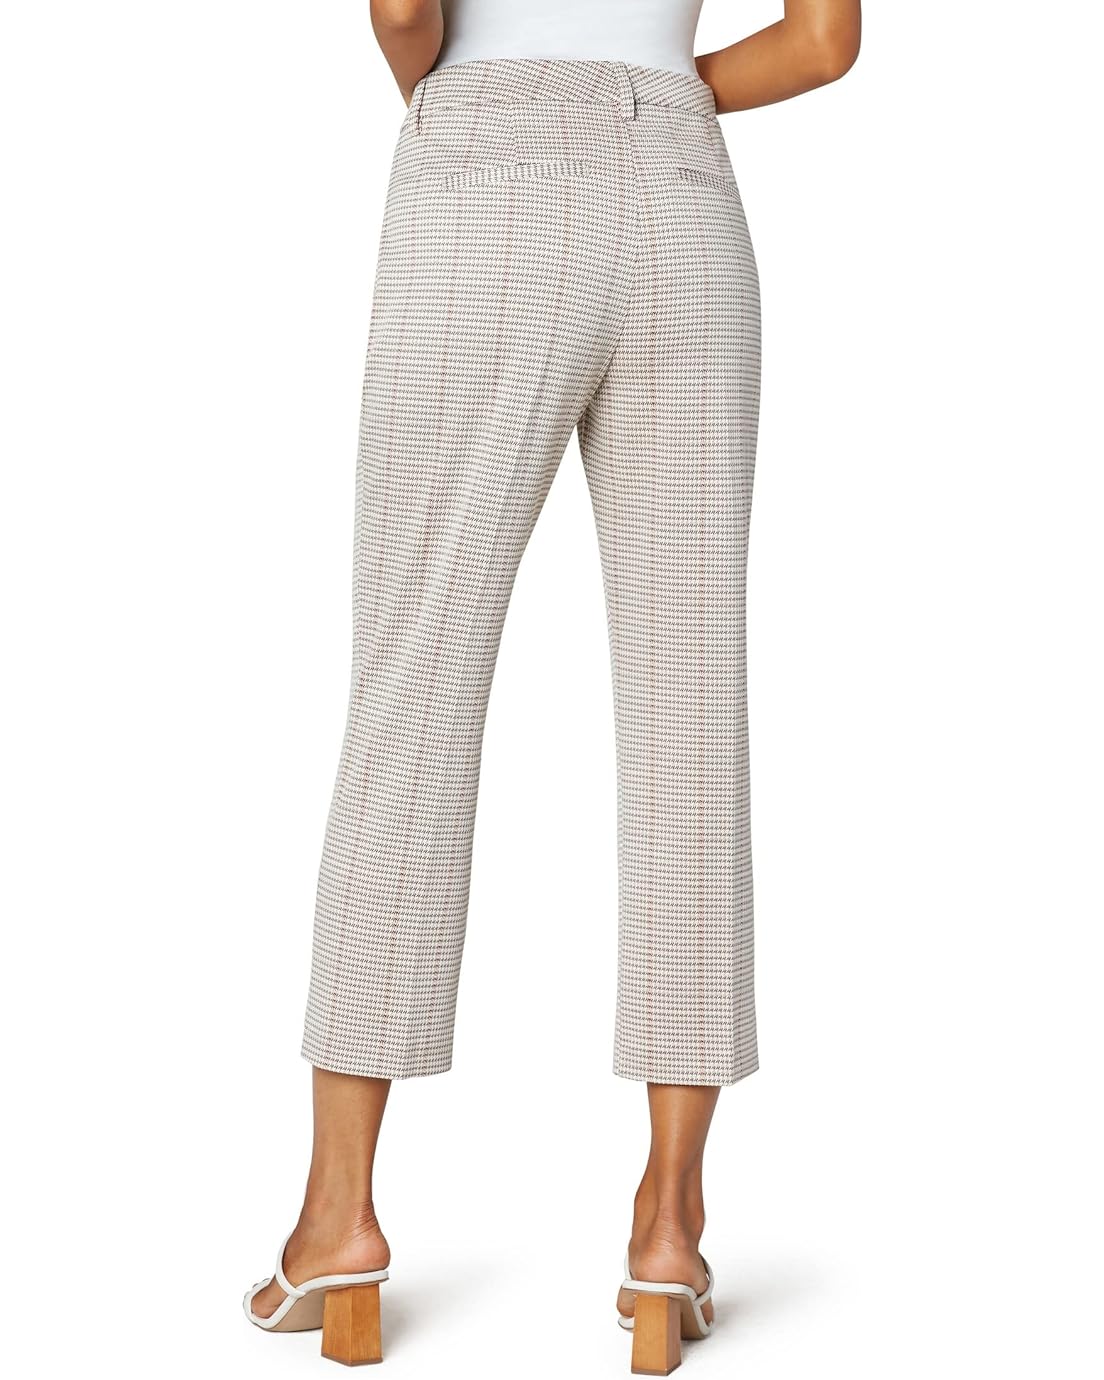  Liverpool Petite William Straight Leg Trousers in Creamu002FTanu002FRed Houndstooth